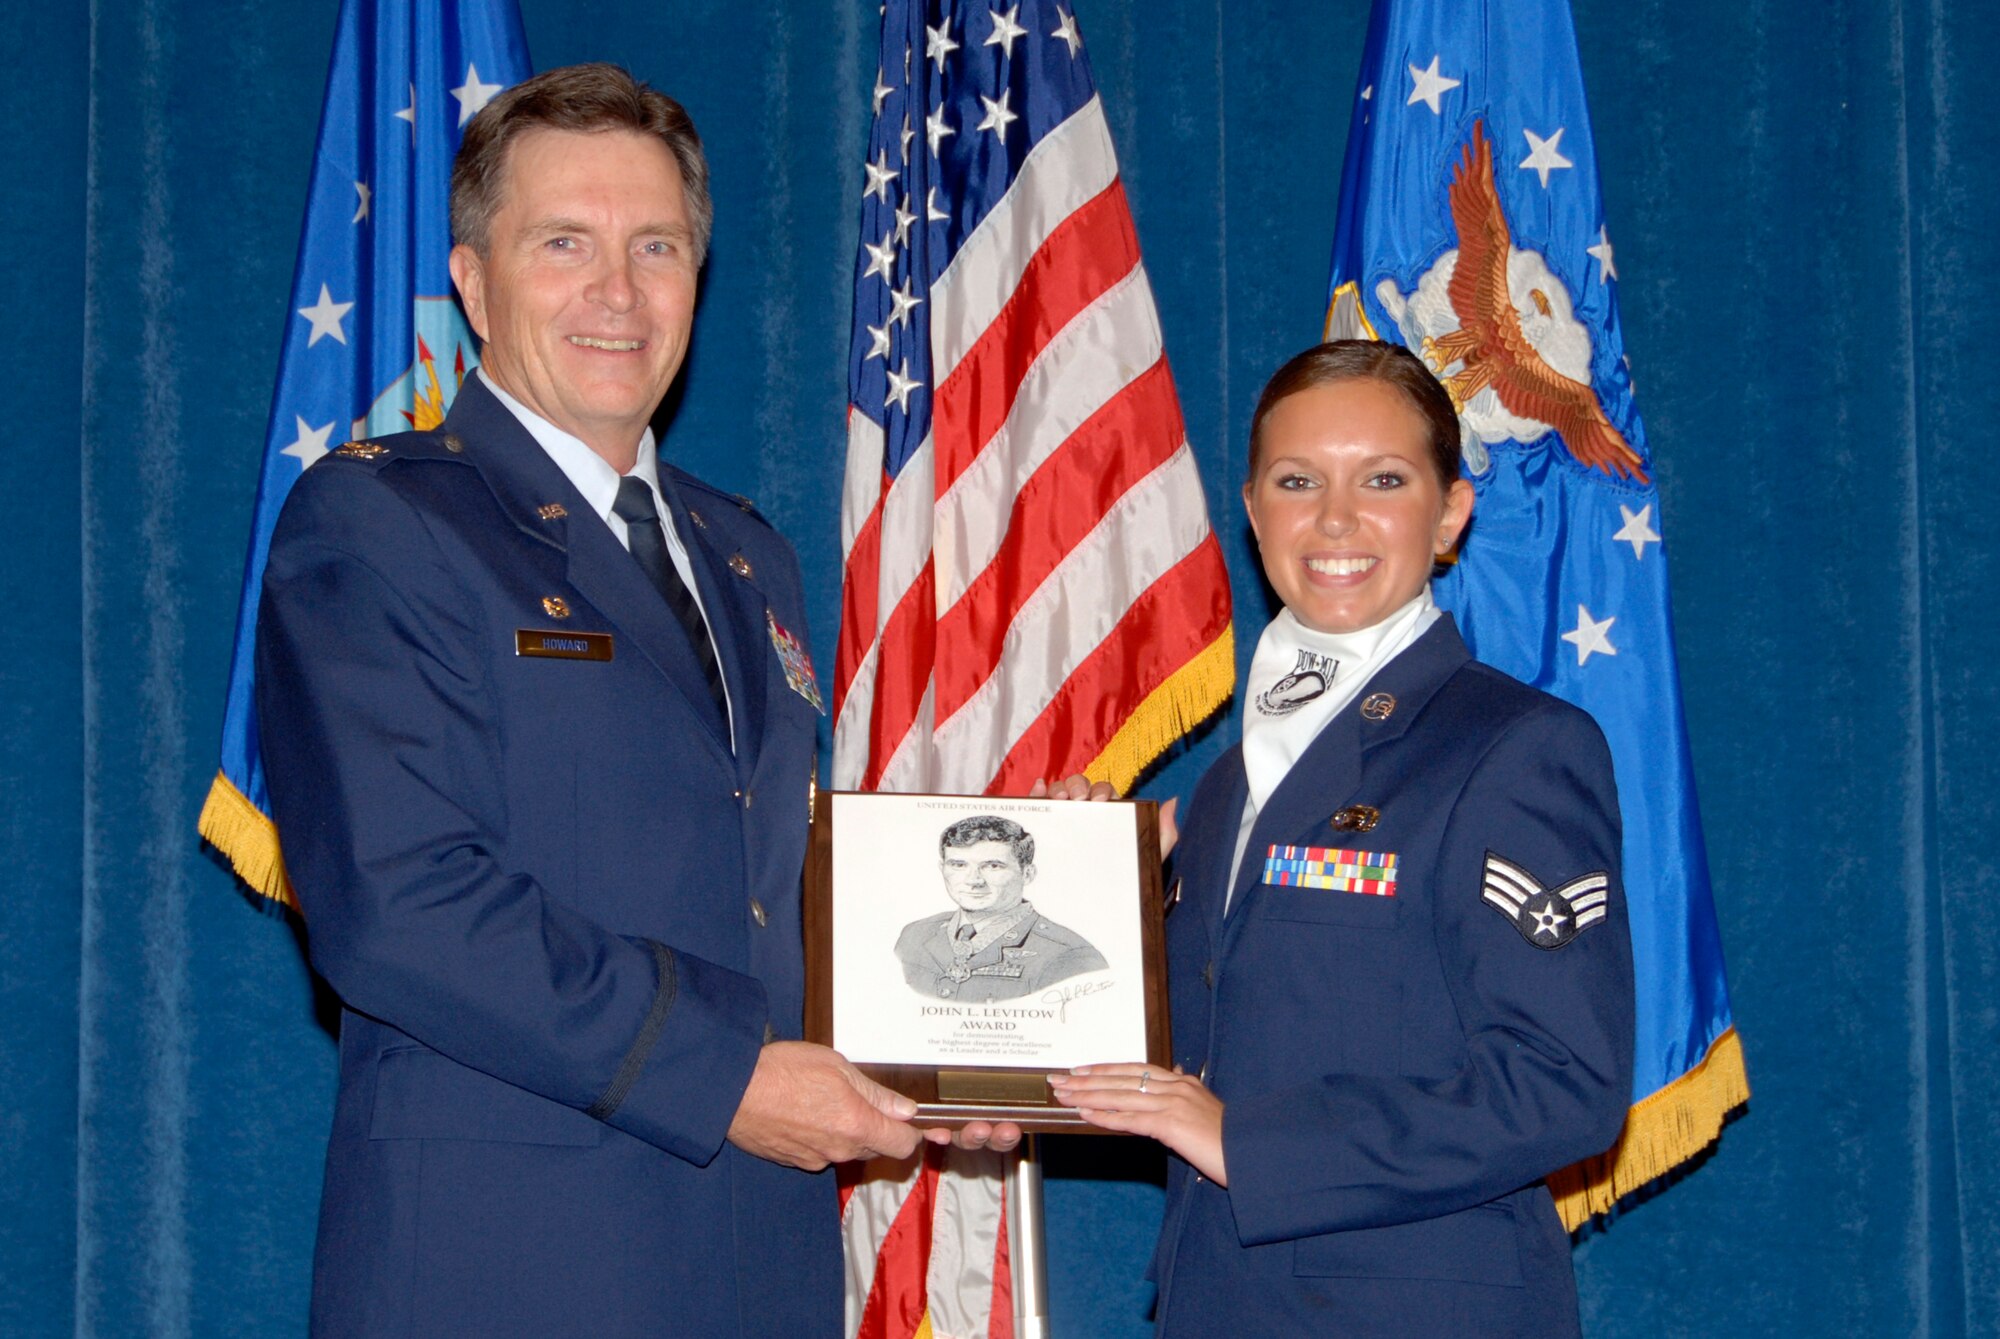 McGHEE TYSON AIR NATIONAL GUARD BASE, Tenn. -- Senior Airman Jennifer M. Kuklenski, an intelligence analyst with the 148th Fighter Wing, Minnesota Air National Guard, receives the John L. Levitow award from Col. Richard B. Howard, commander, for her accomplishments at Airman Leadership School Class 09-6 at The I.G. Brown Air National Guard Training and Education Center here, Oct. 29, 2009.  The John L. Levitow Award is the highest honor awarded a graduate of any Air Force enlisted professional military education course.  (U.S. Air Force photo by Master Sgt. Kurt Skoglund)